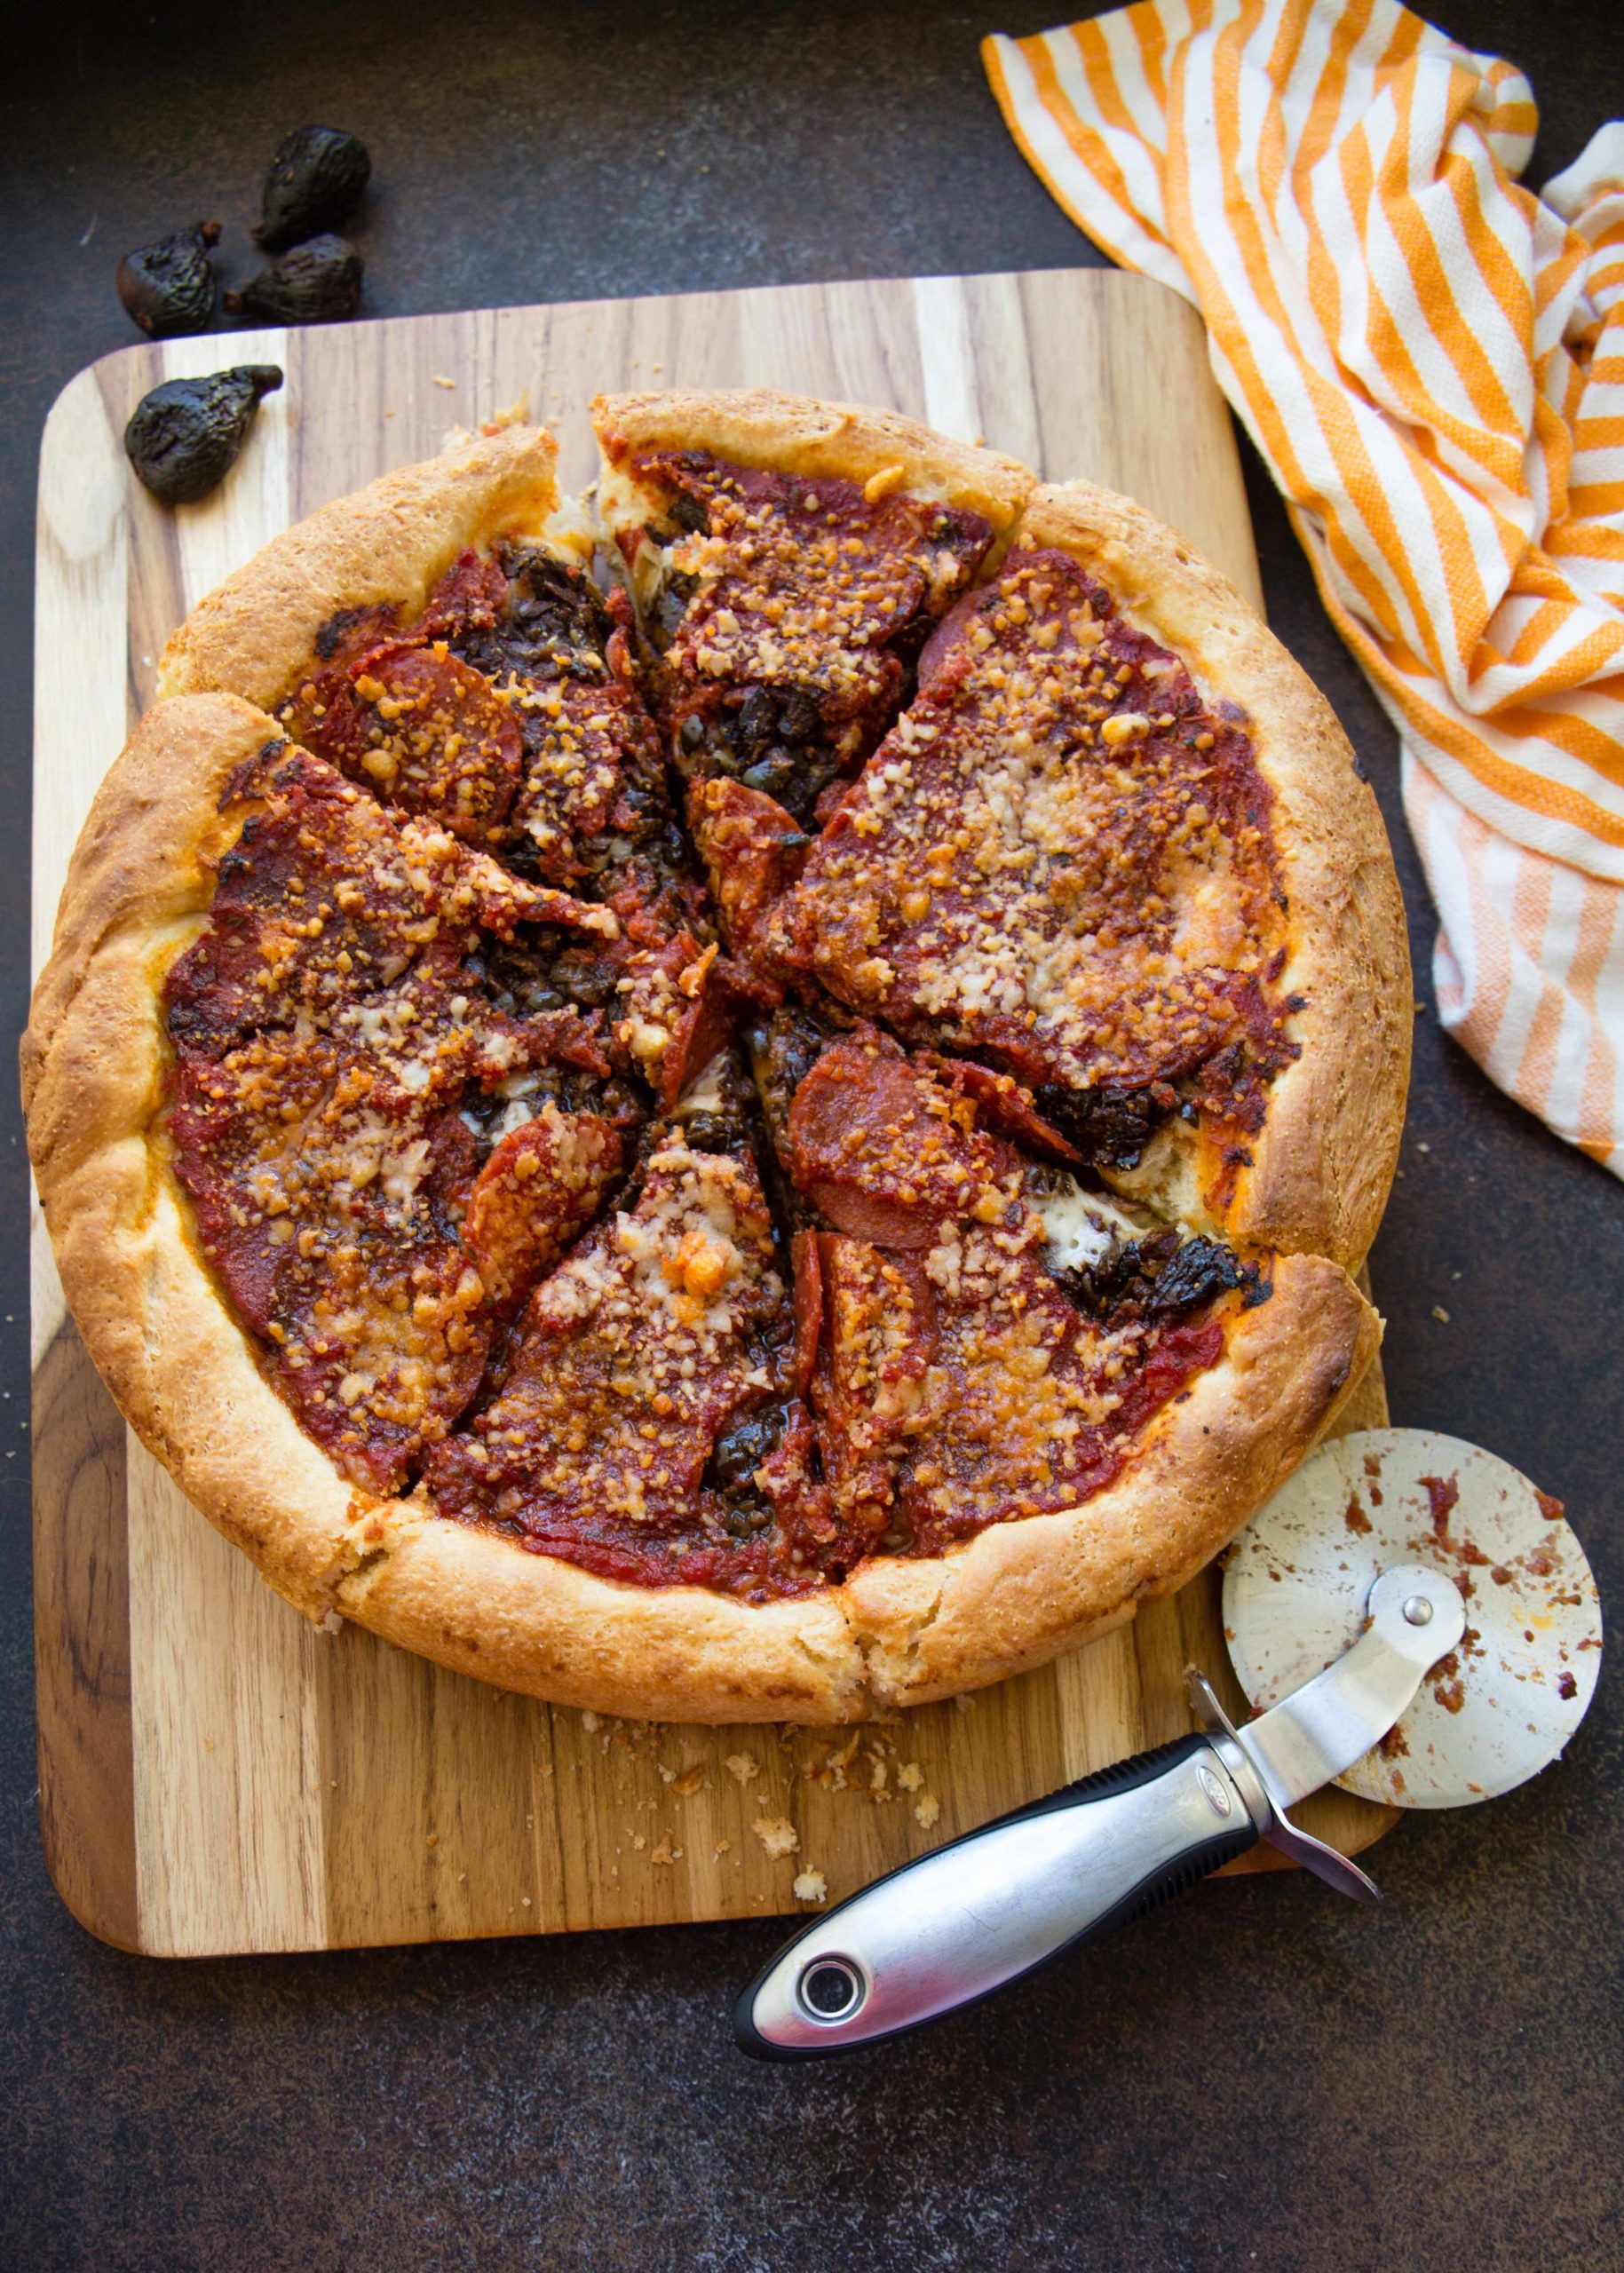 https://valleyfig.com/wp-content/uploads/2021/10/Deep-Dish-Fig-Olive-Pepperoni-Pizza-credit-AnneliesZ-1433V-scaled.jpg